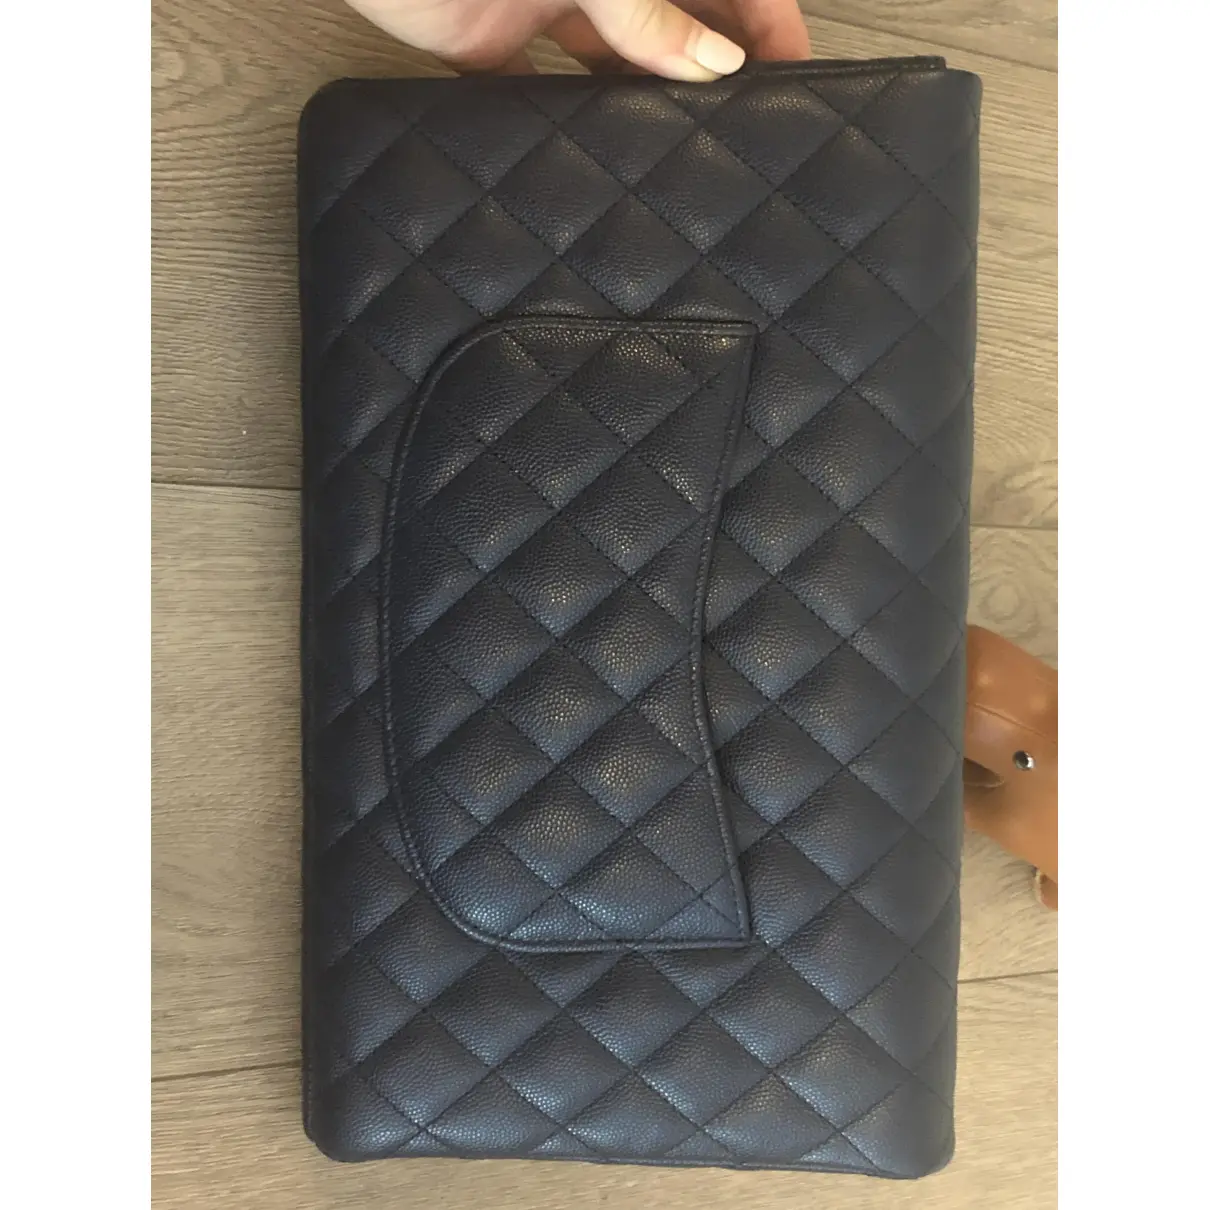 Buy Chanel Timeless/Classique leather clutch bag online